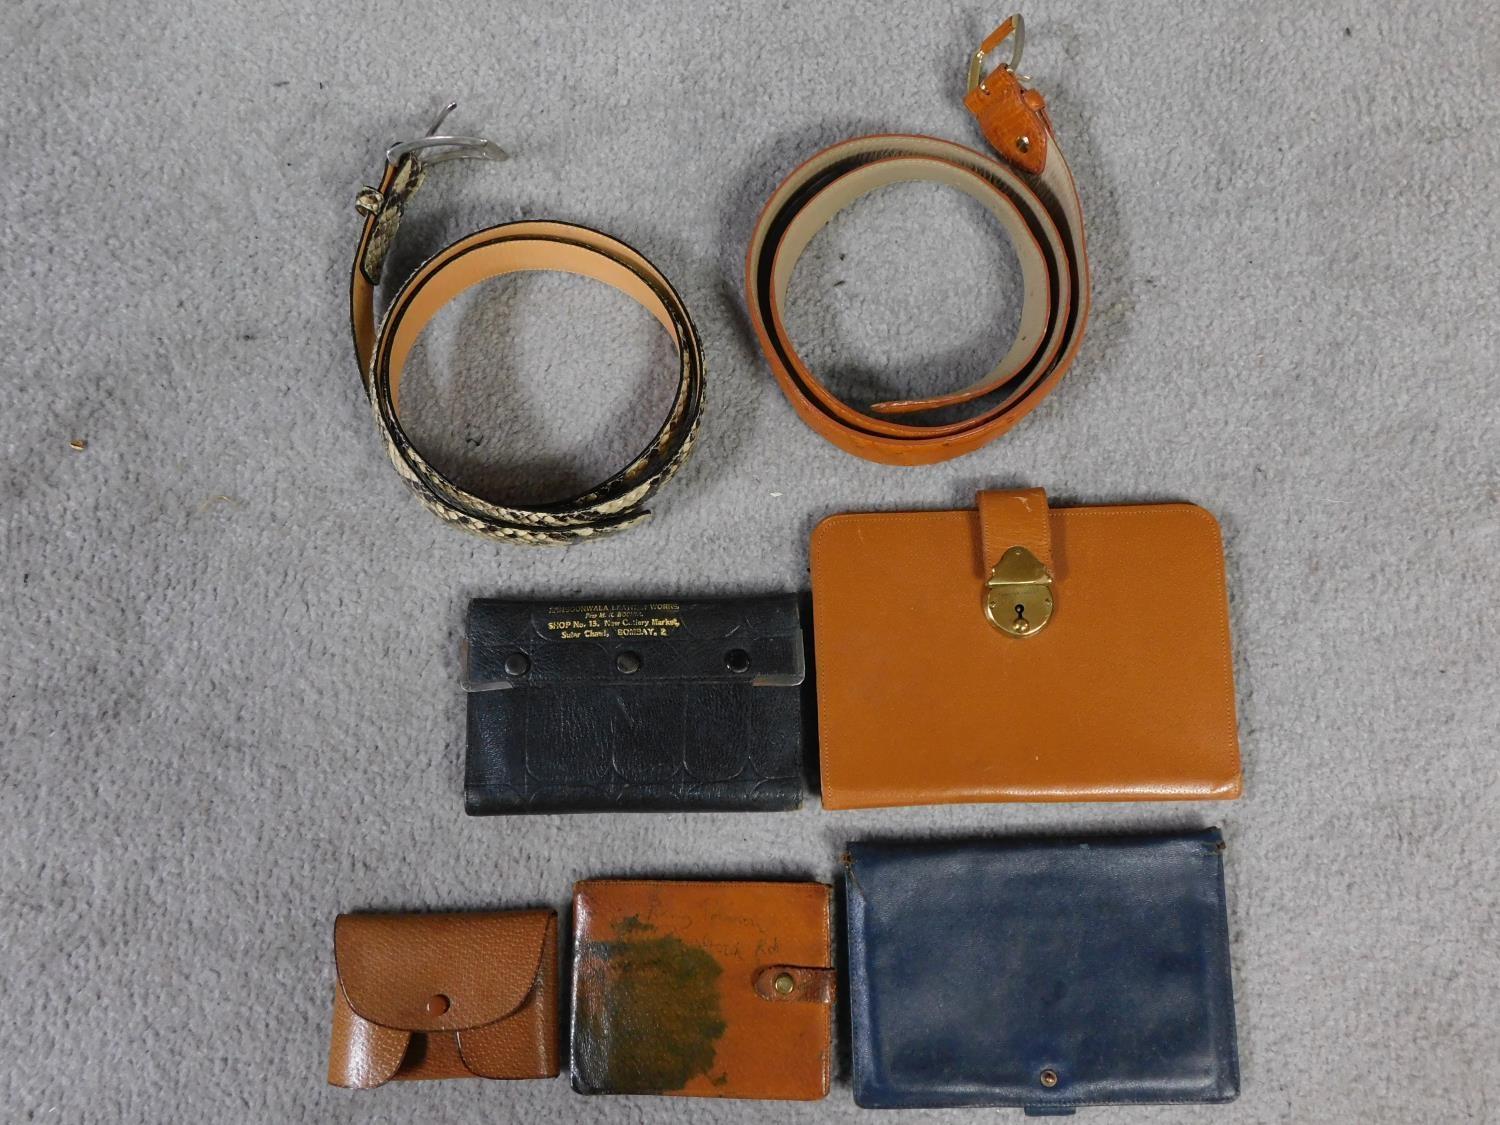 A collection of vintage leather travel and money wallets and two belts. One belt is ostrich and